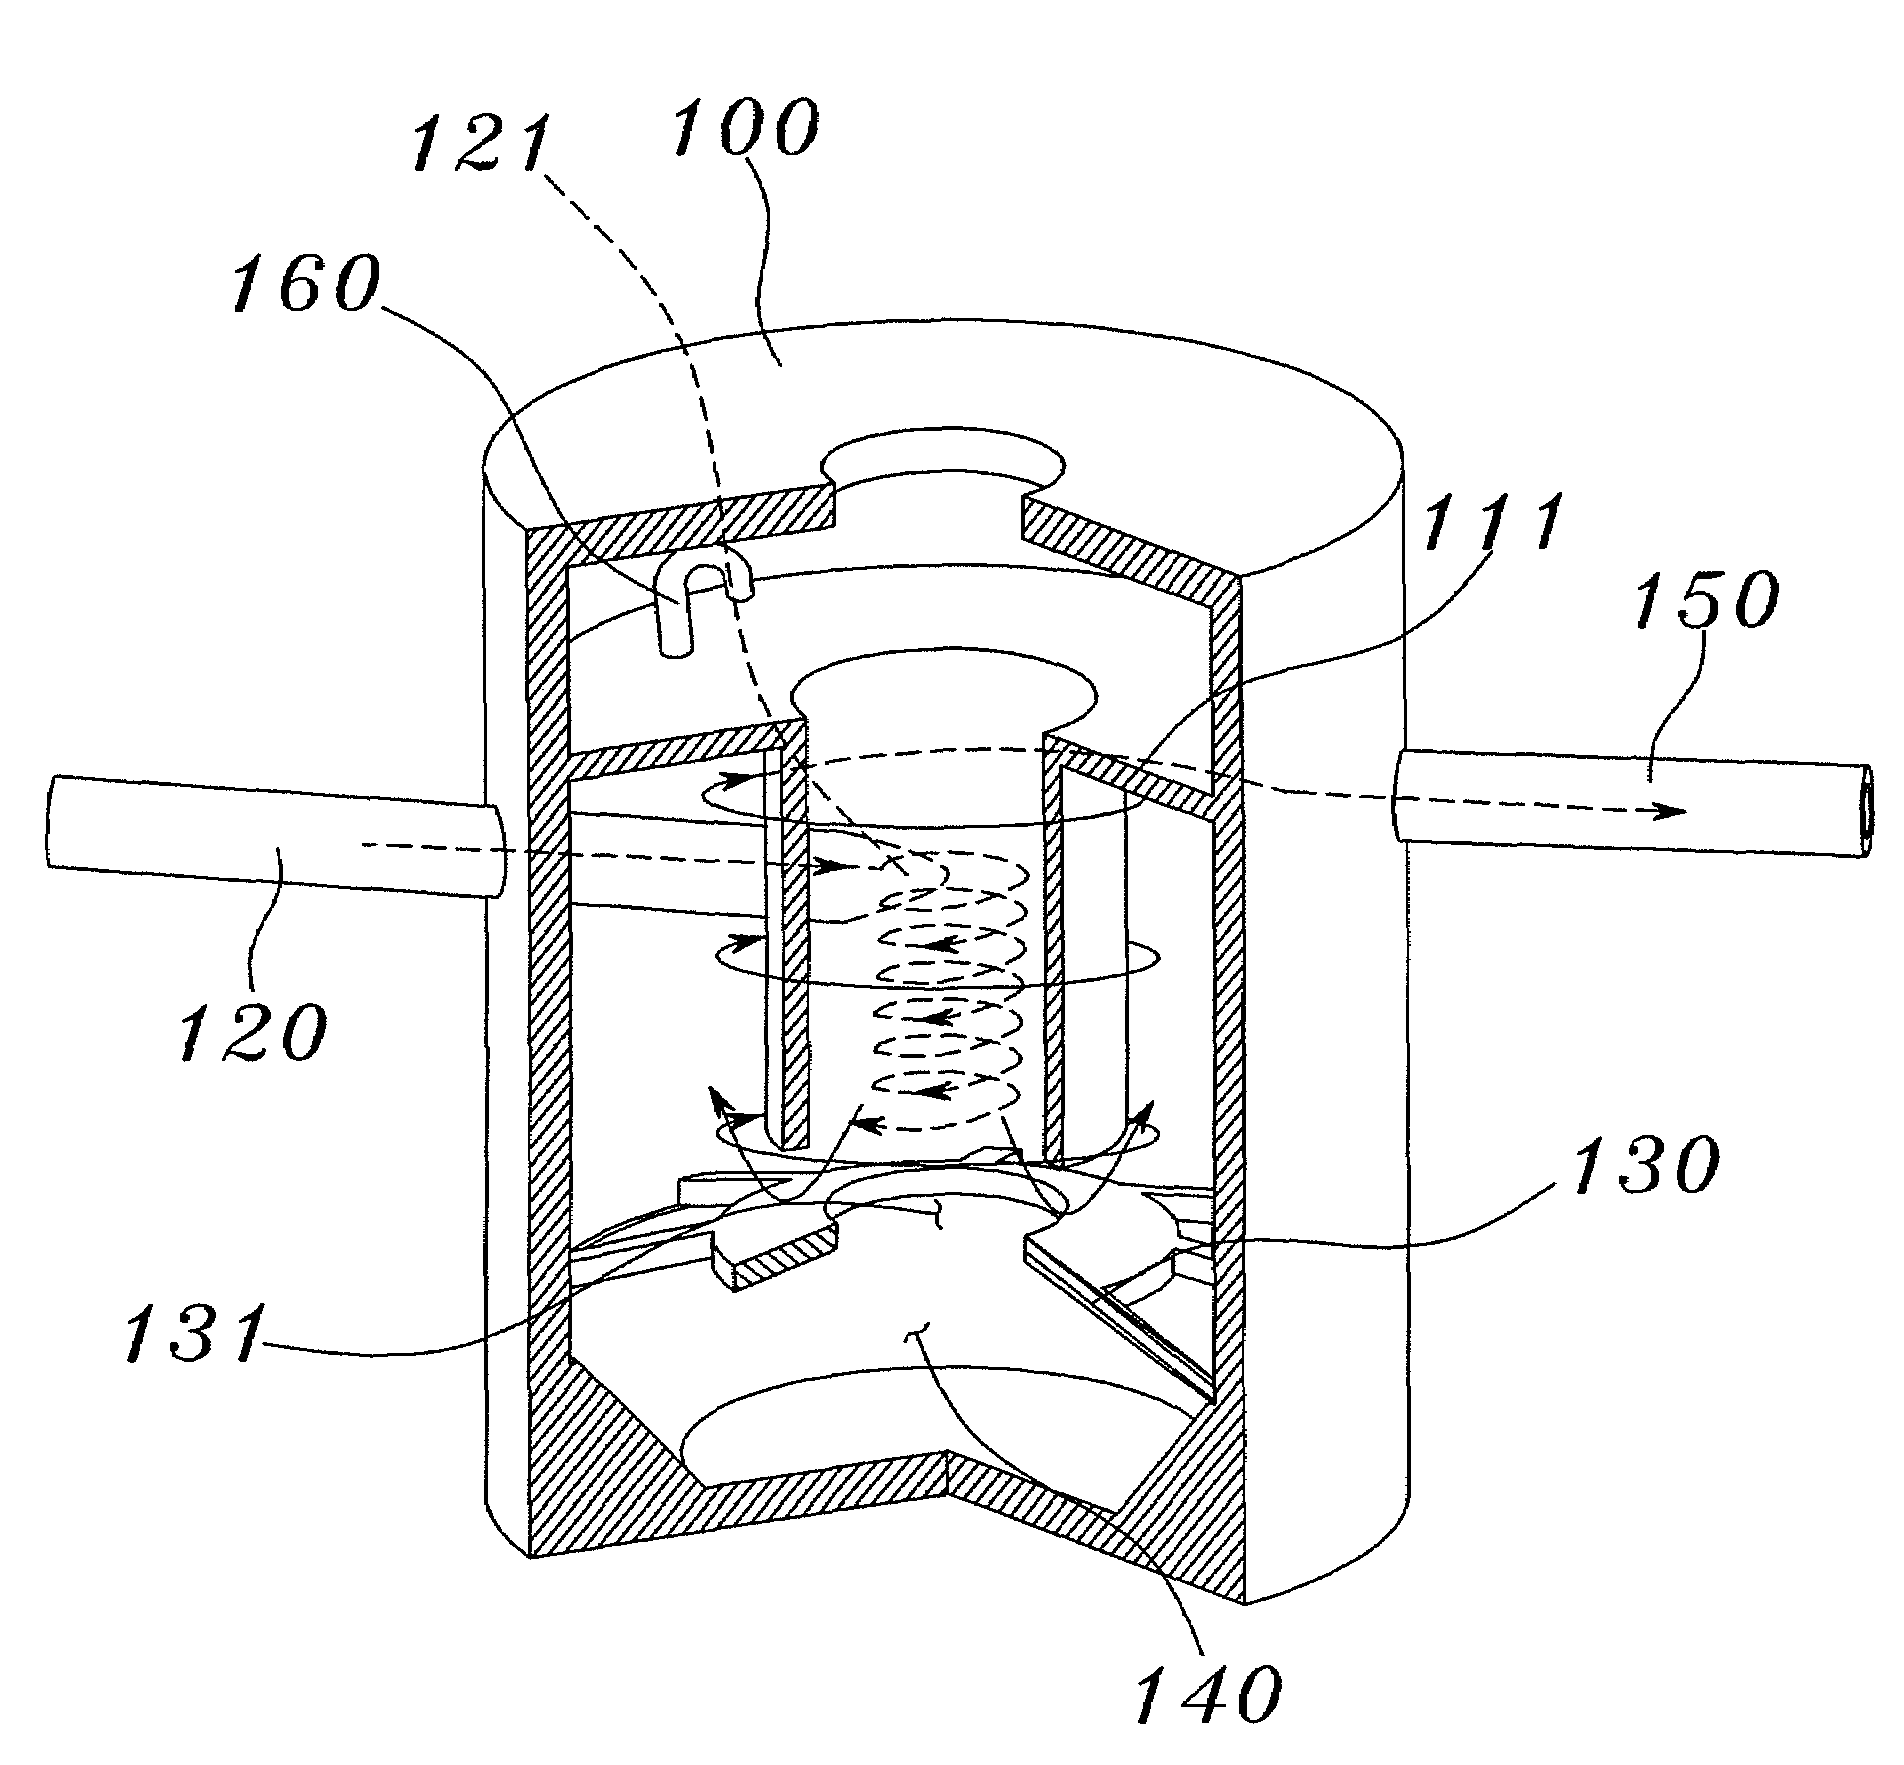 Vortex separator for separating floating and settling substances from centrally inflowing storm-water